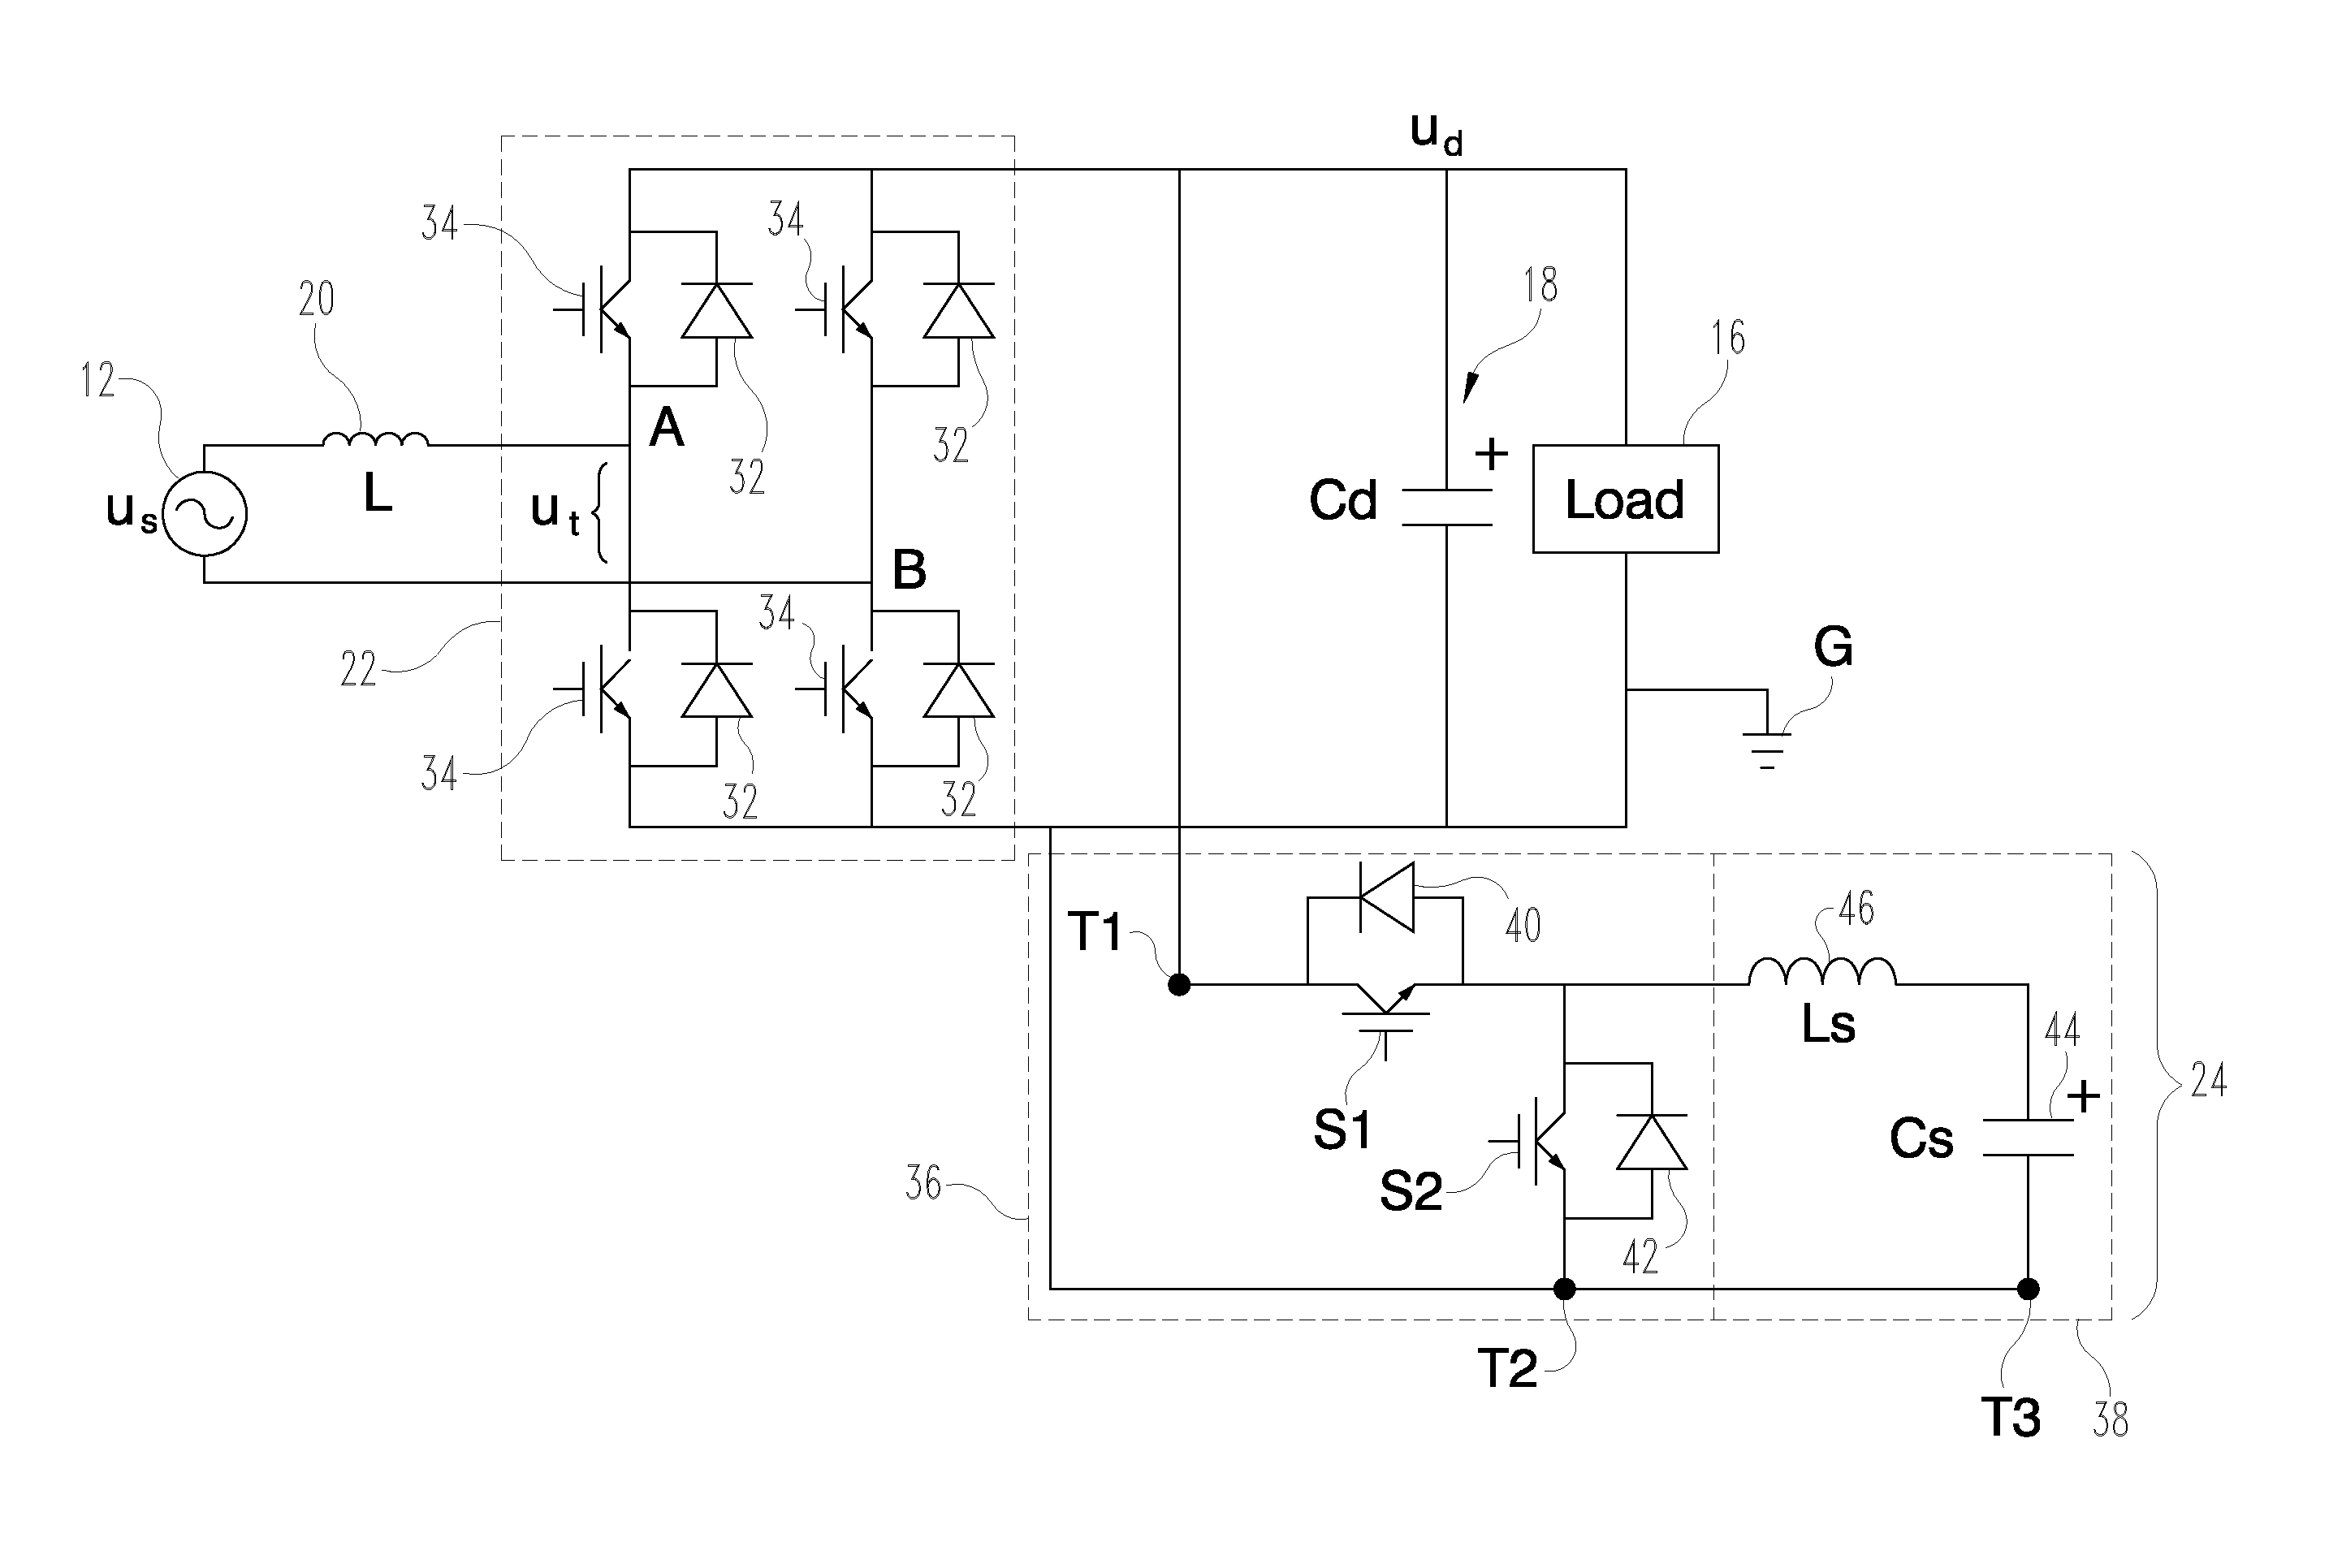 Electrical power system with high-density pulse width modulated (PWM) rectifier